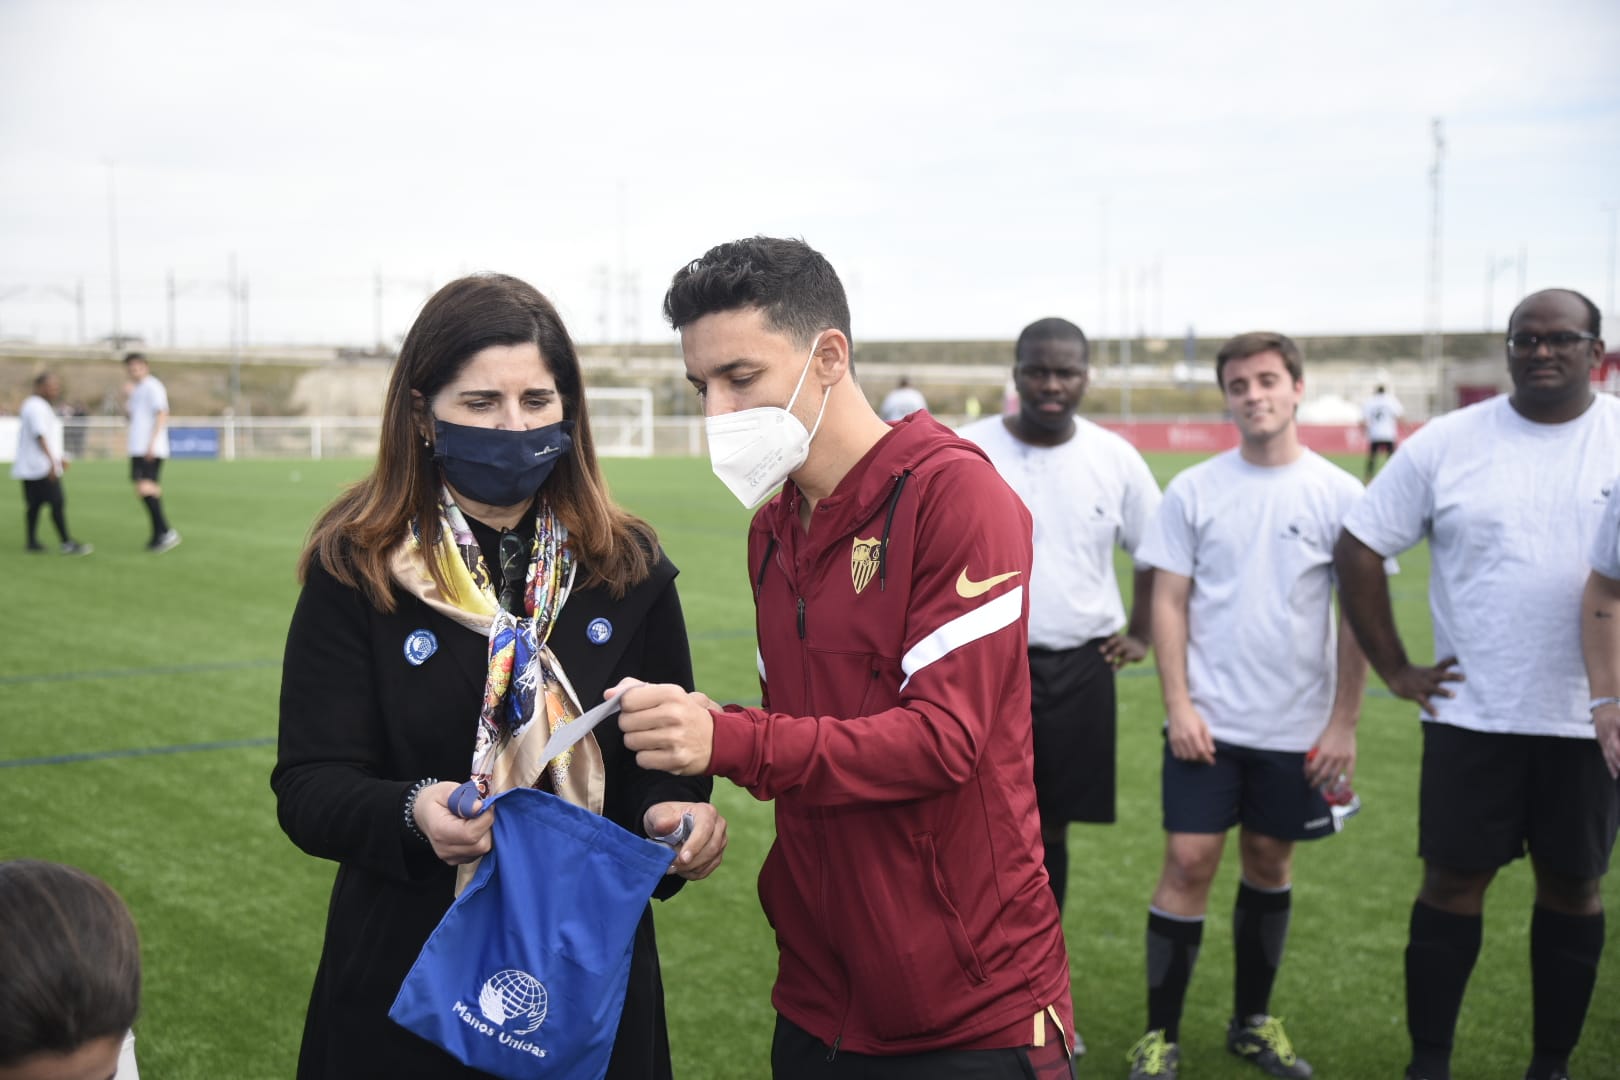 Jesús Navas at the charity game in support of Manos Unidas